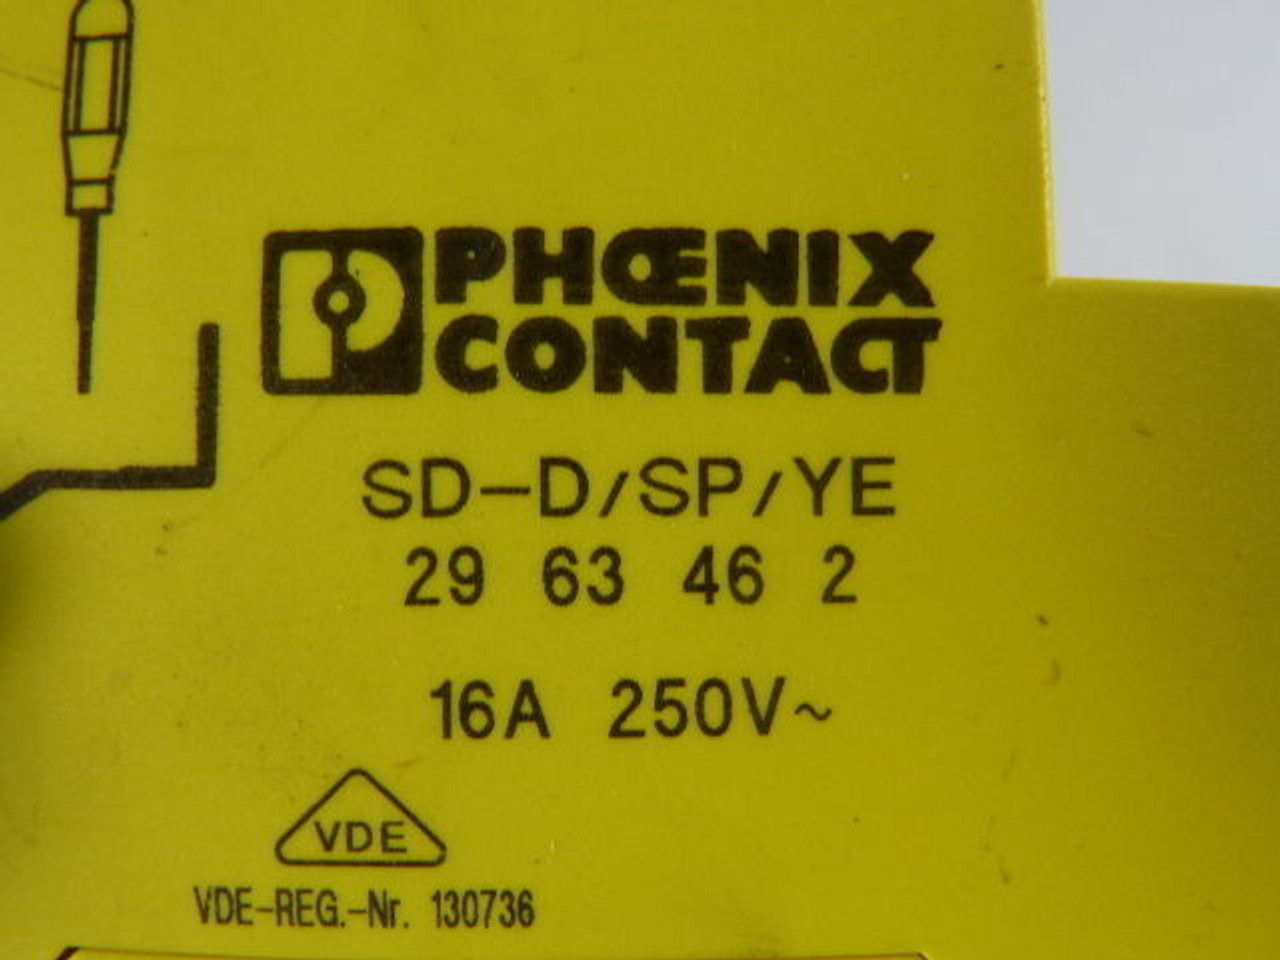 Phoenix Contact SD-D/SP/YE 2963462 Control Cabinet Socket 16A 250V USED